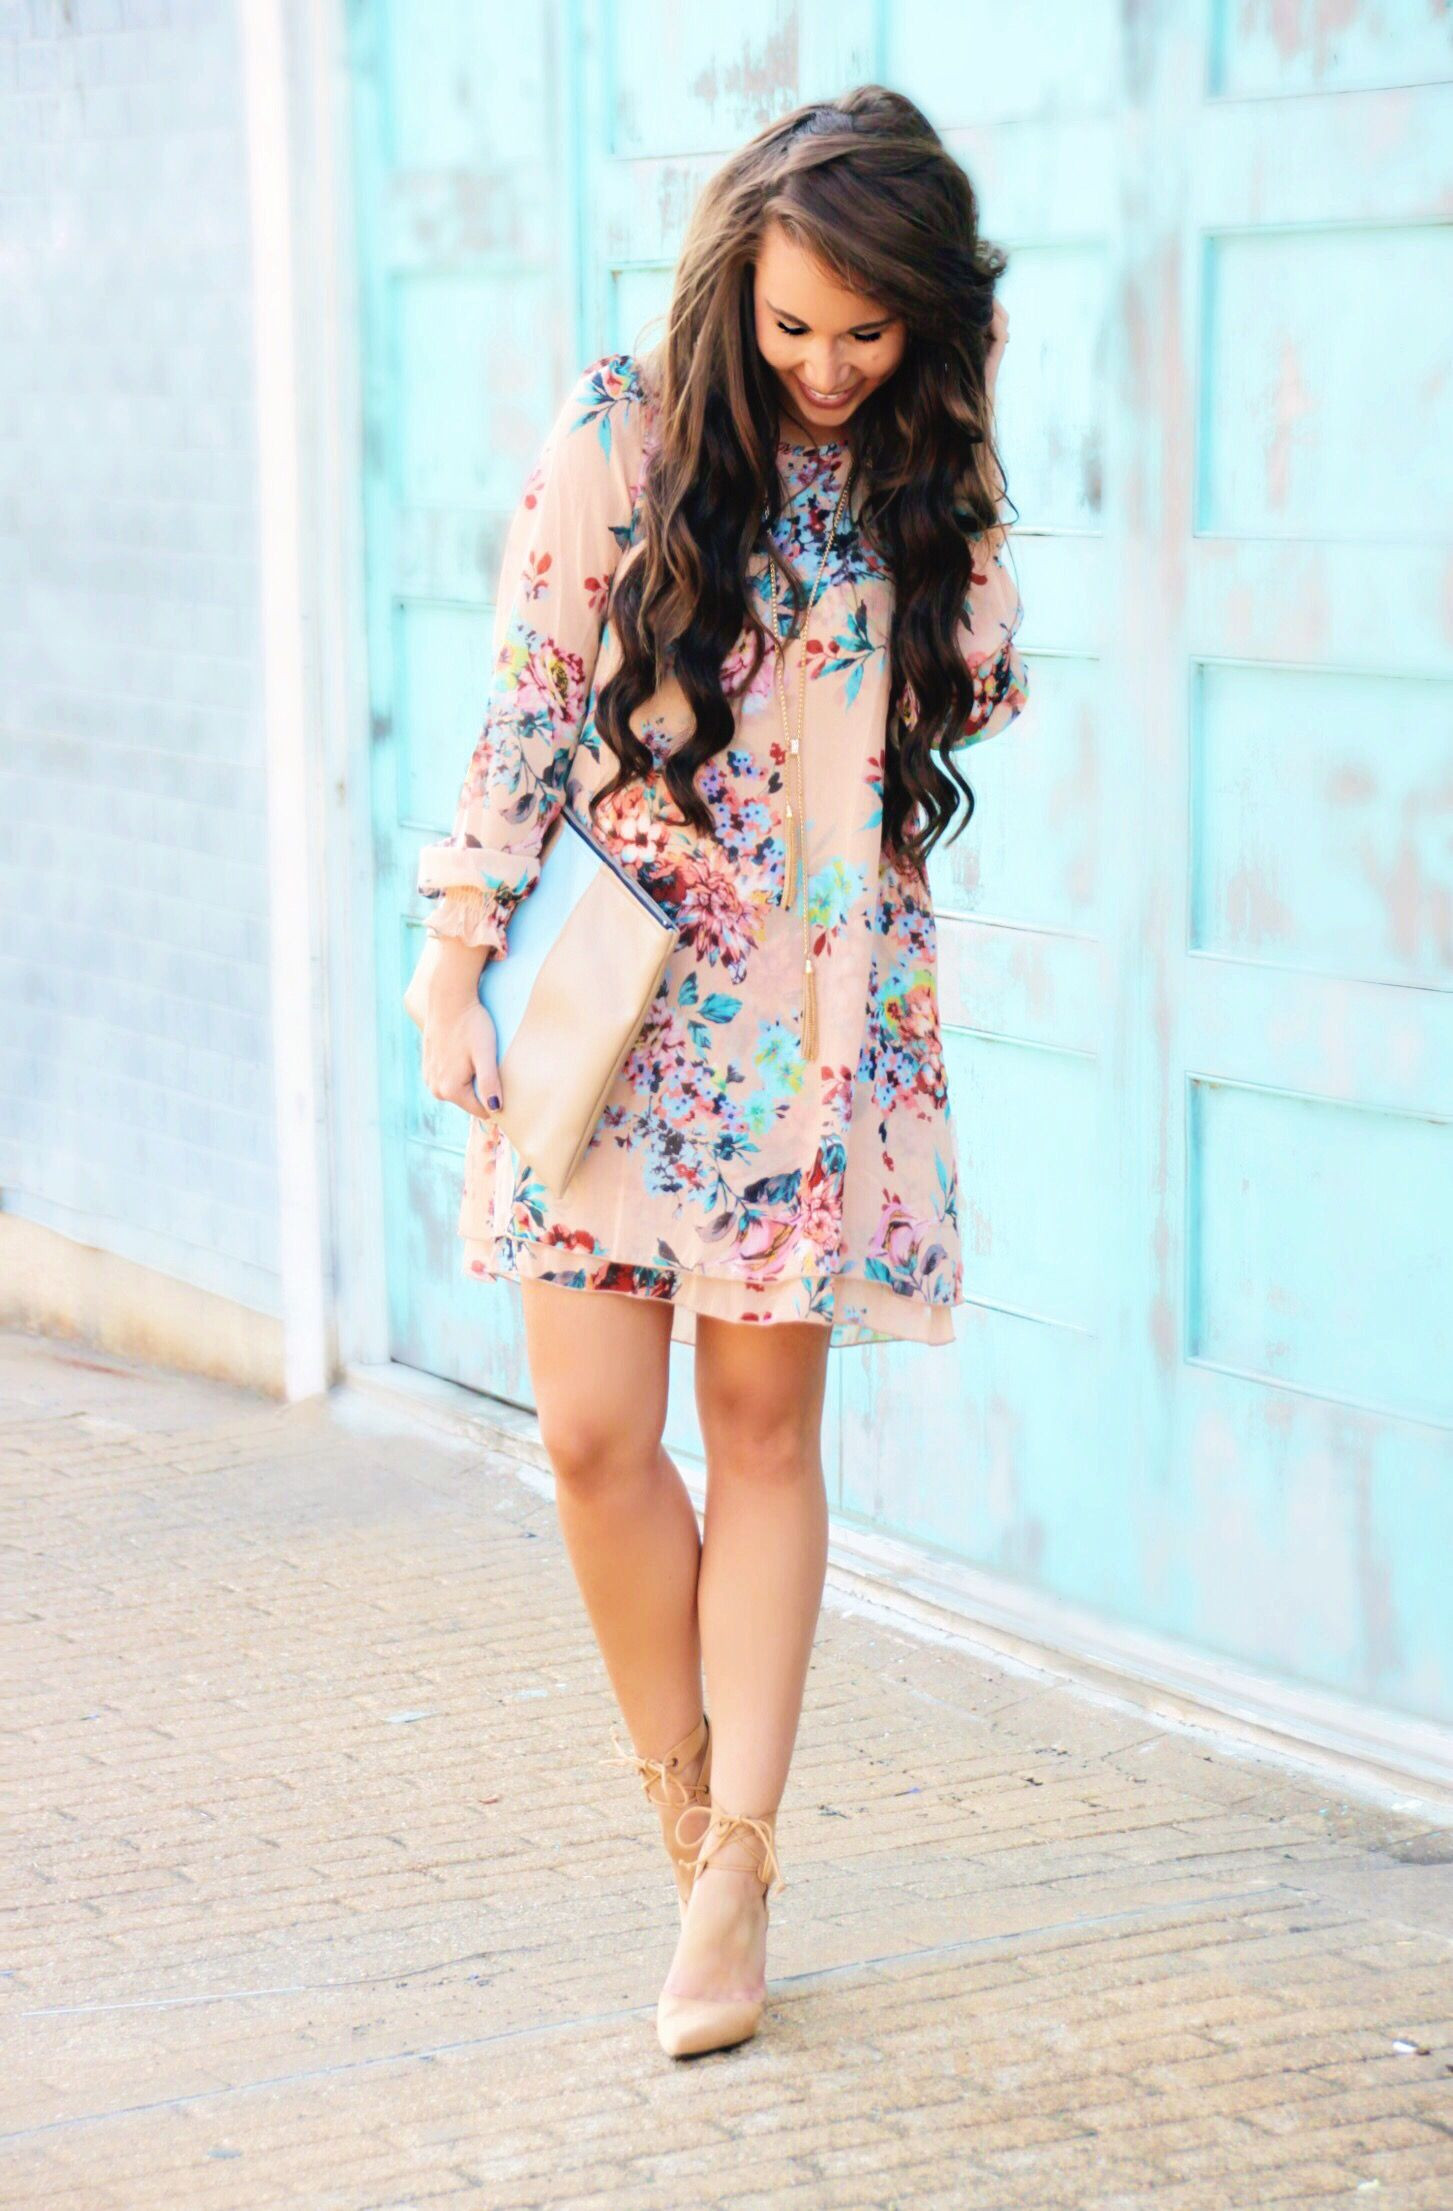 Easter Sunday Outfit Ideas
 I like the colors of this dress and floral pattern for